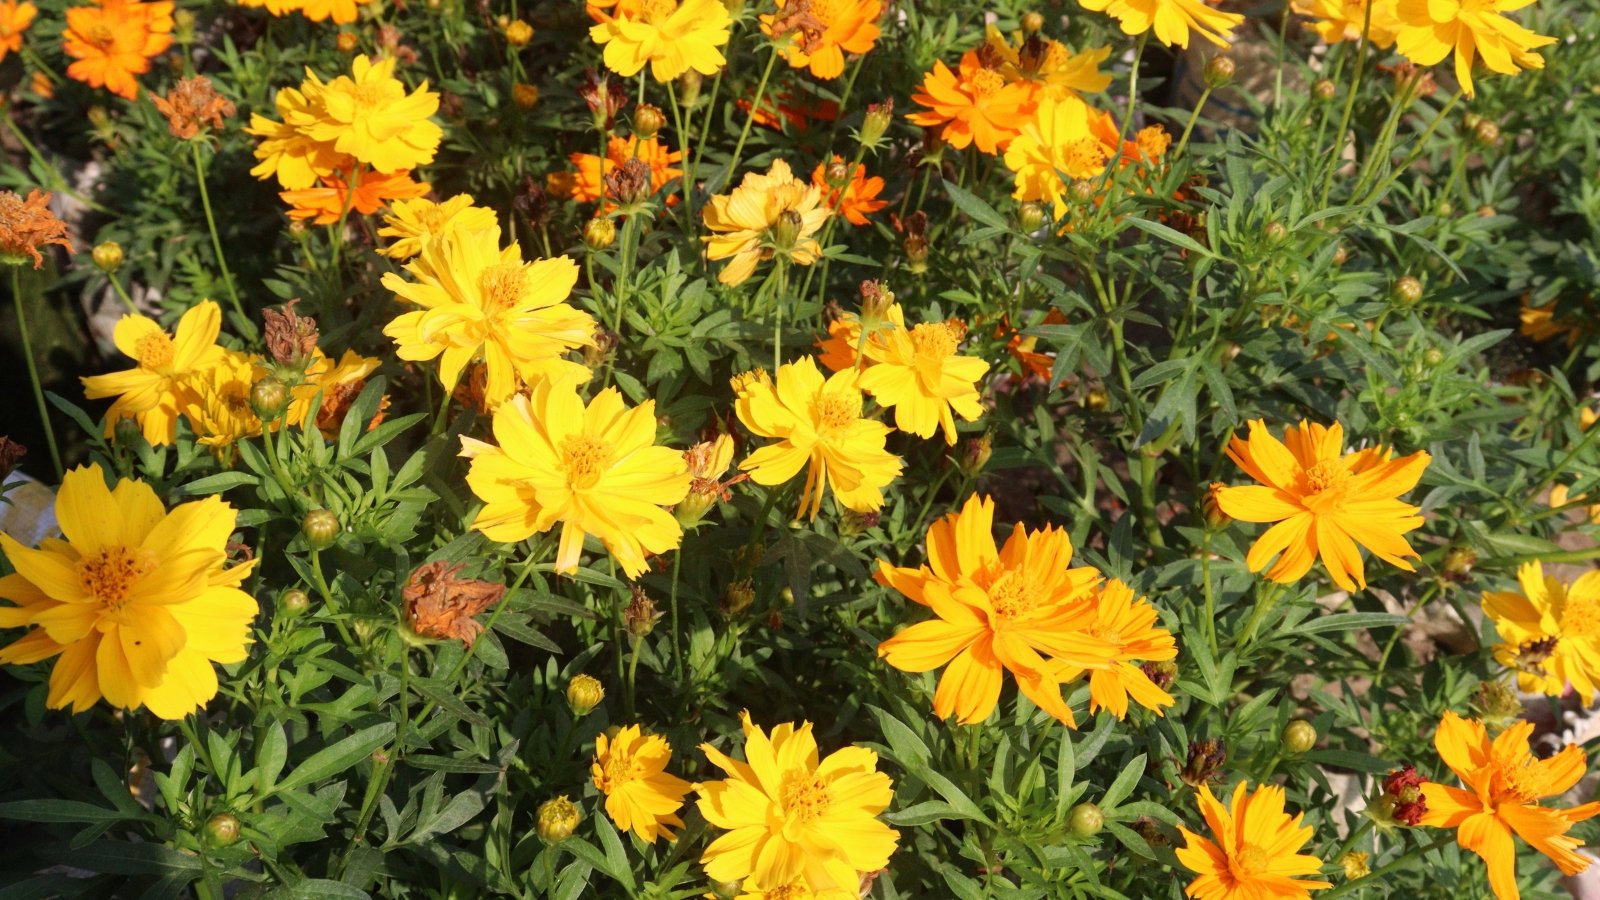 Orange cosmos flowers contrast against verdant foliage, soaking in radiant sunlight, creating a picturesque scene of natural beauty and tranquility.